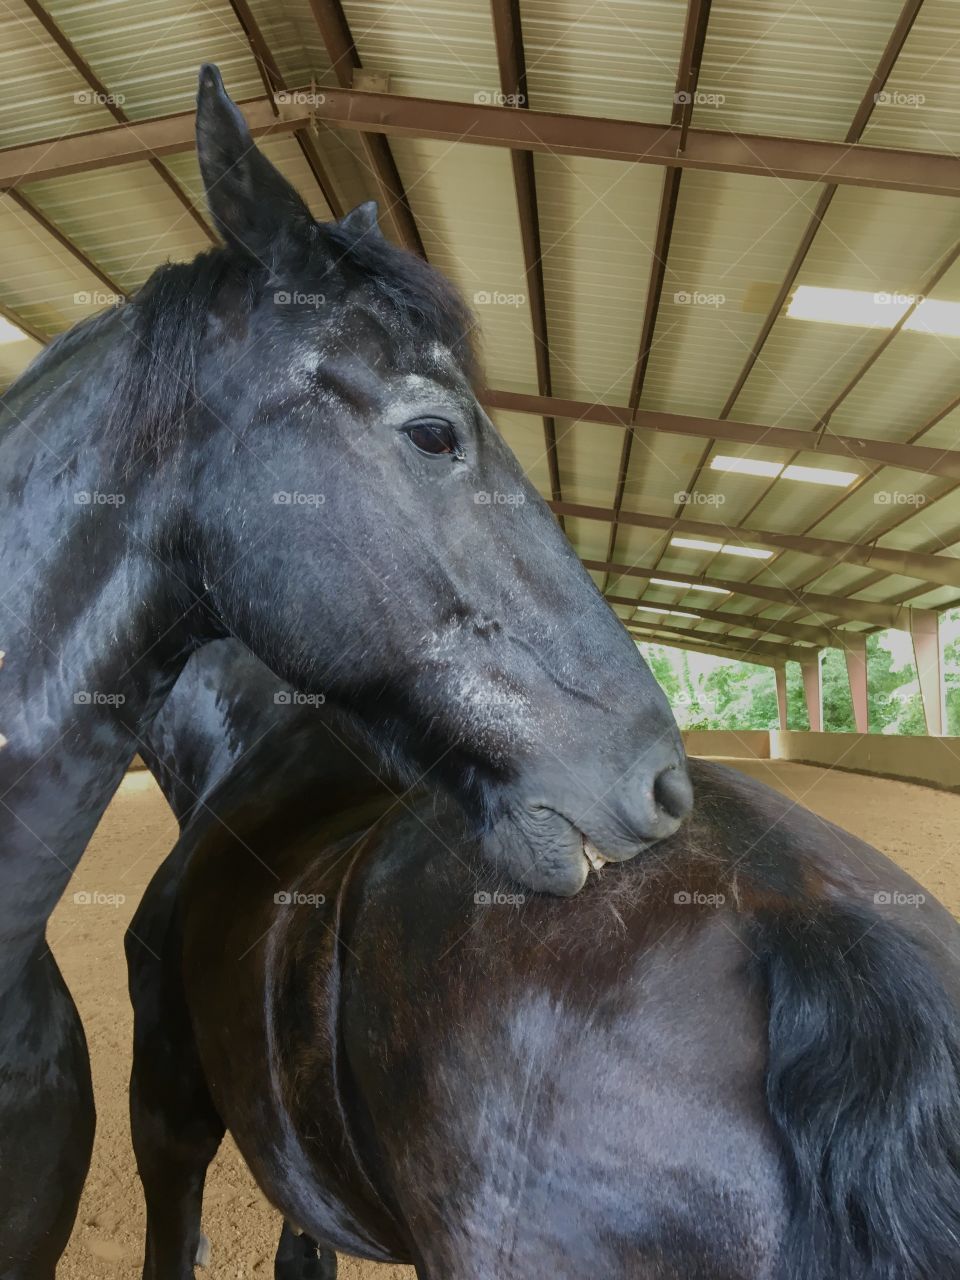 Belgian blacks, stallions, Clydesdale, beautiful black horse, equine, Staples, equine therapy, beautiful creature, shimmering, sleek, “Black is beautiful”